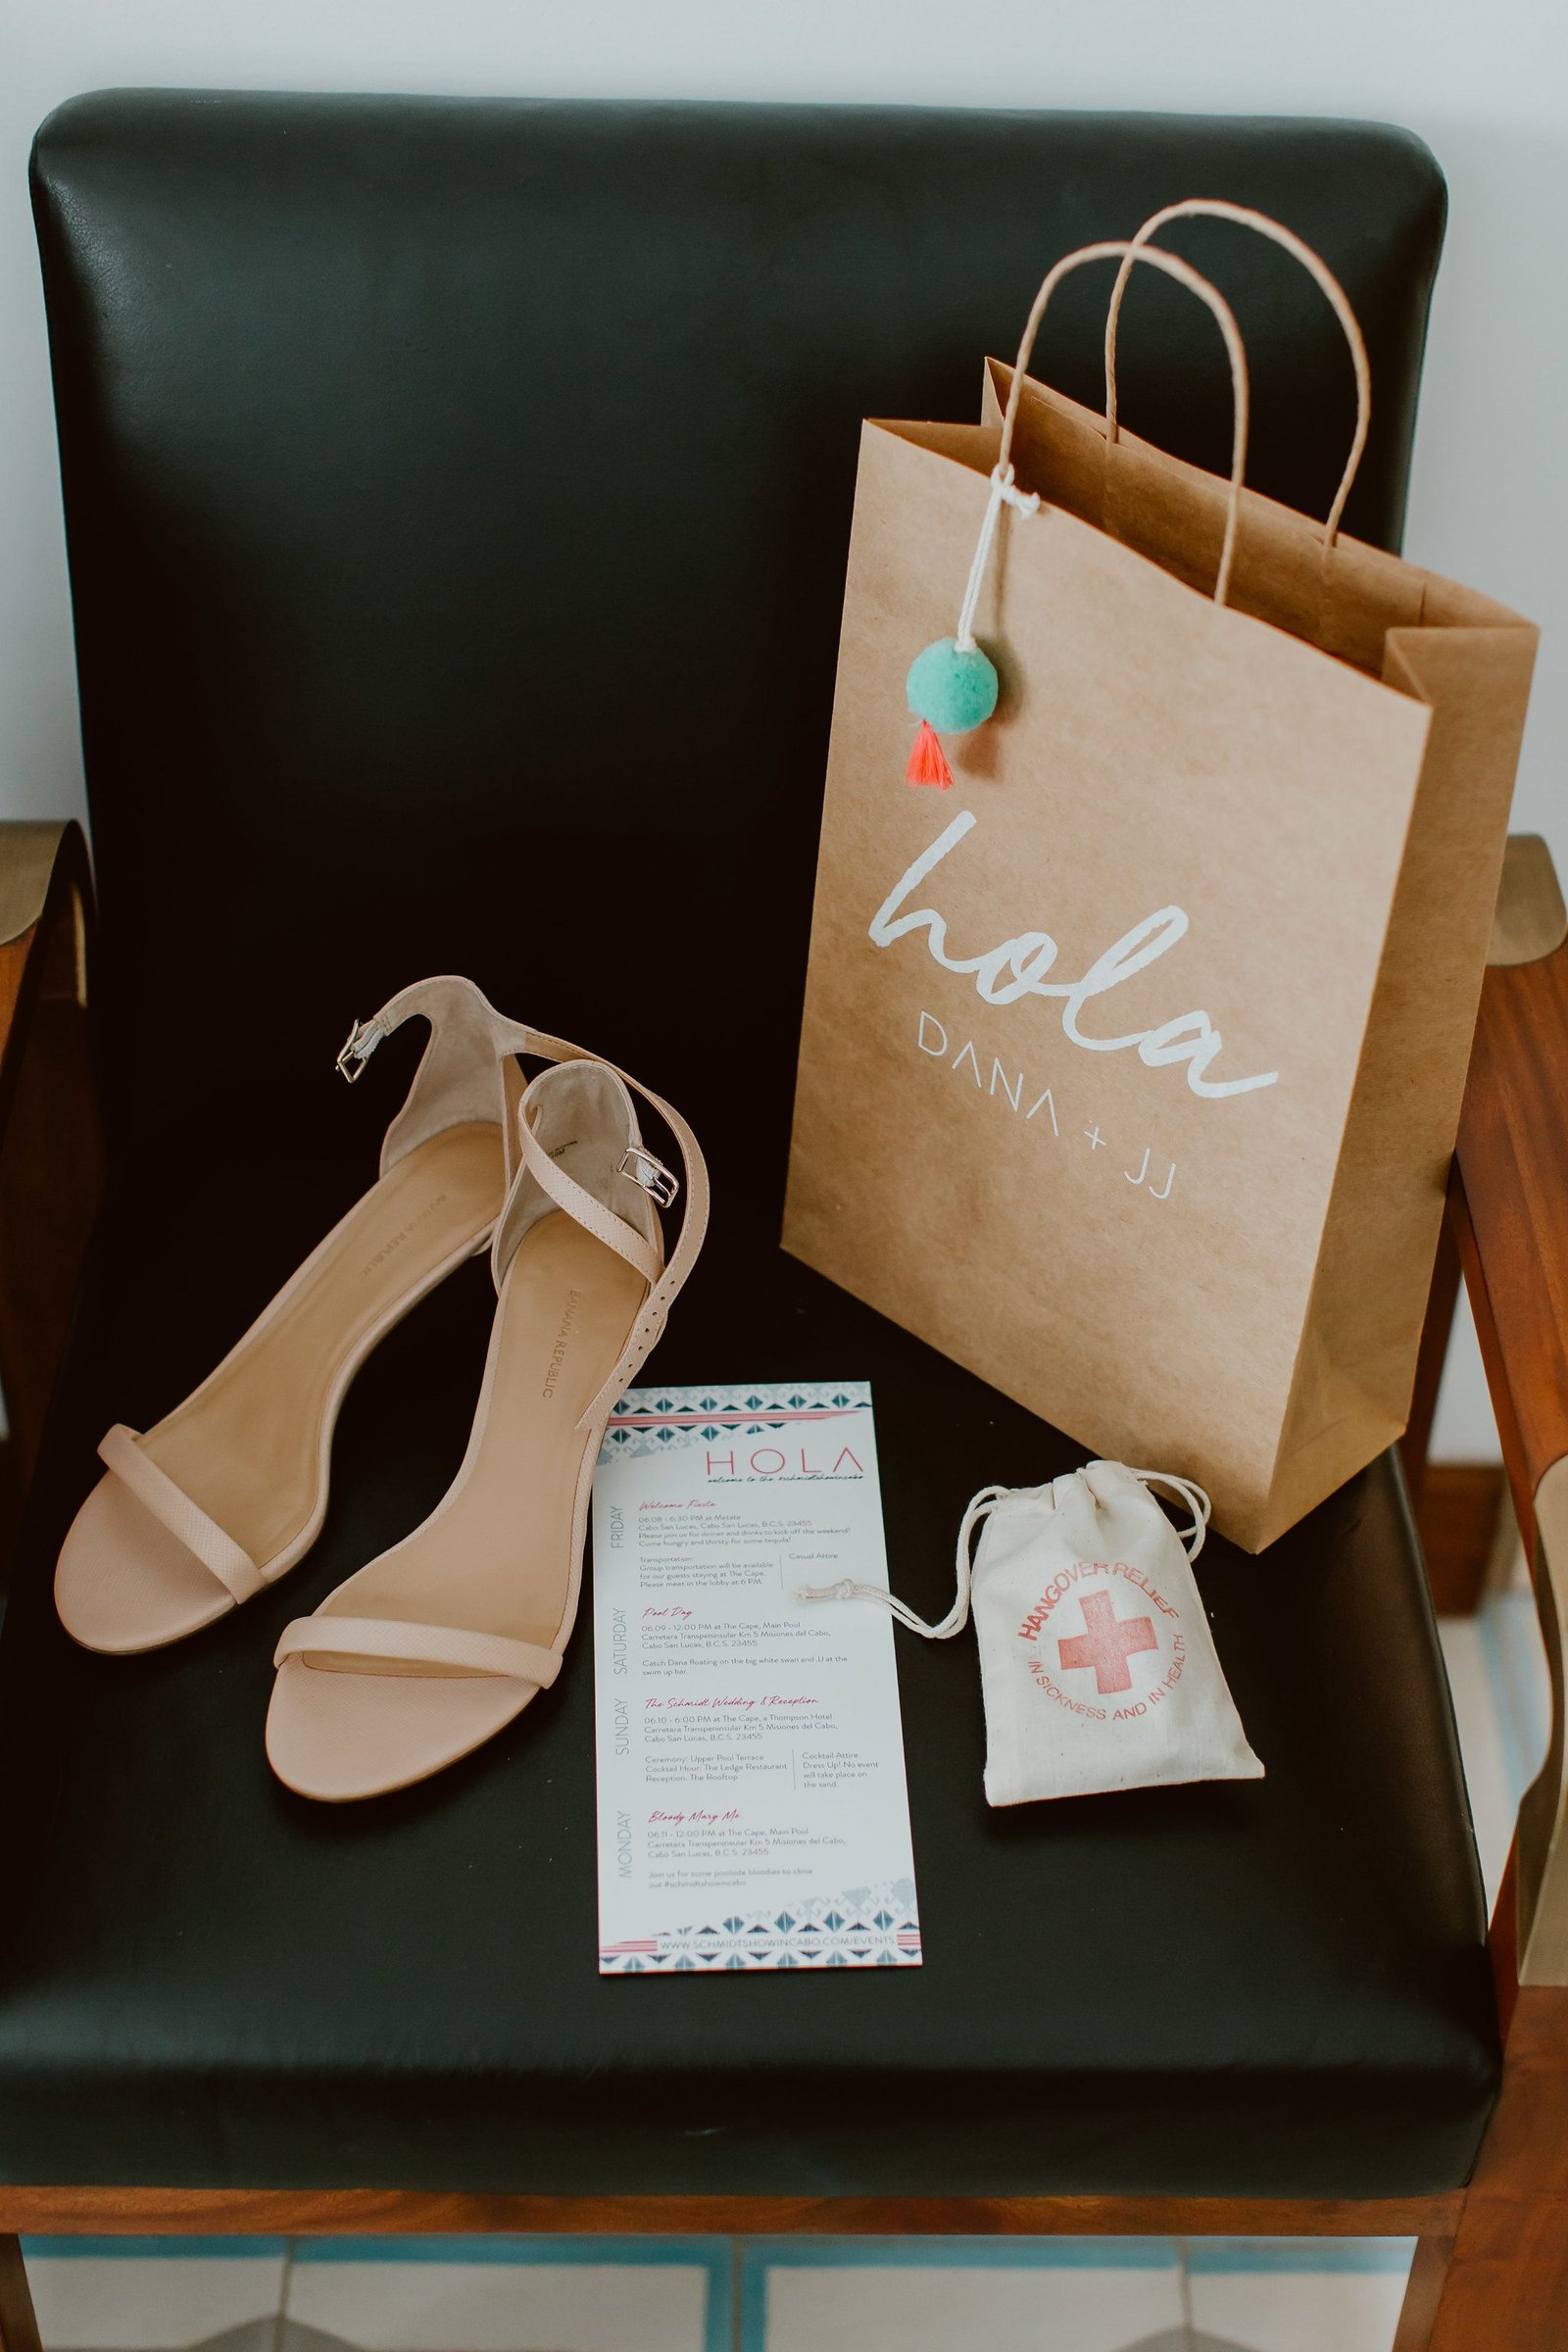 Wedding shoes , Wedding Program, Hangover Kit and Welcome Bag for Brides guests during their wedding day in Cabo San Lucas Mexico, at The Cape